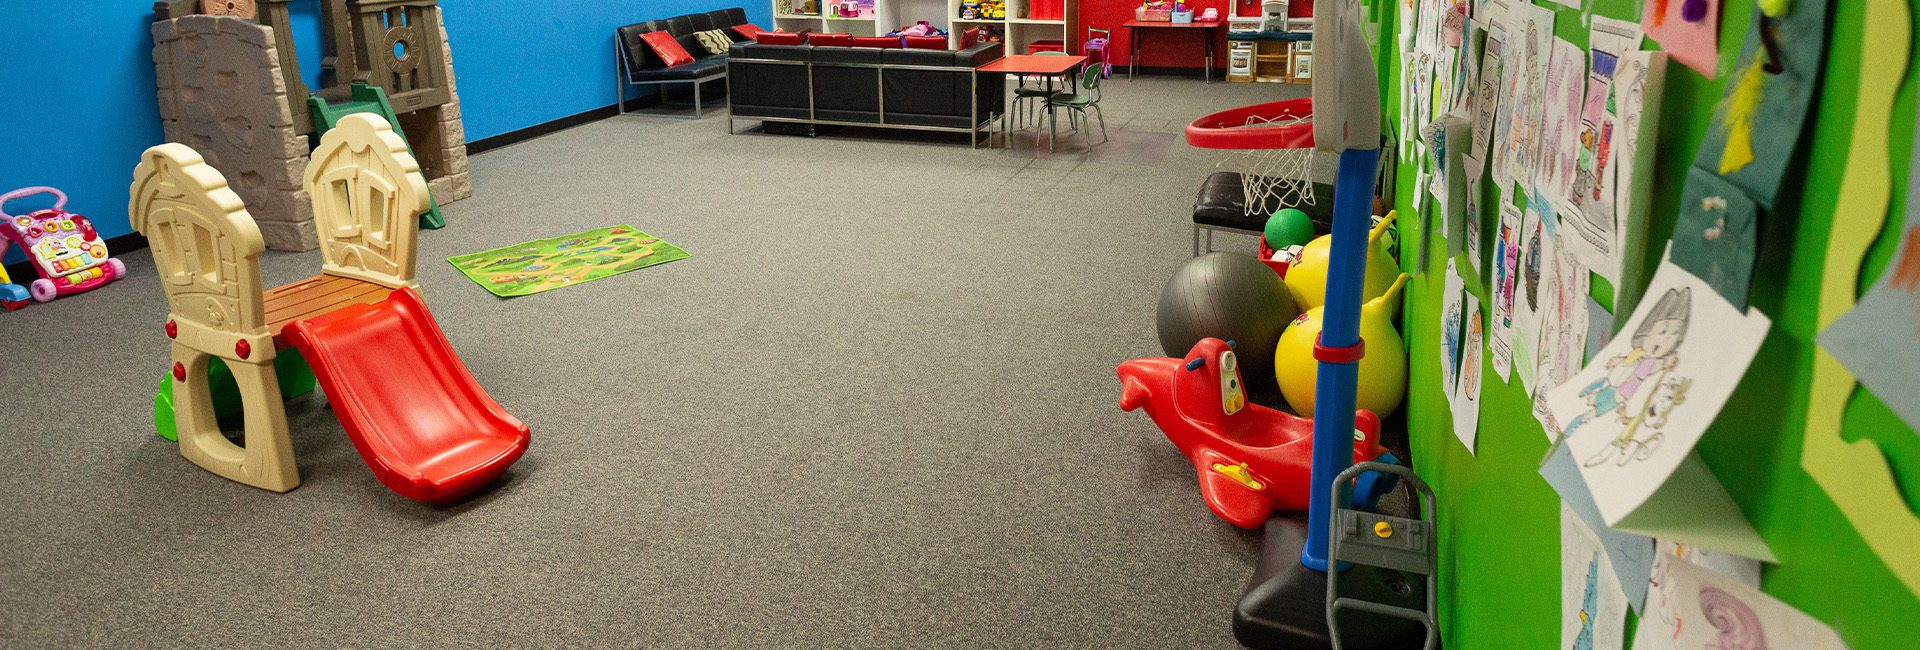 childcare room in a modern gym